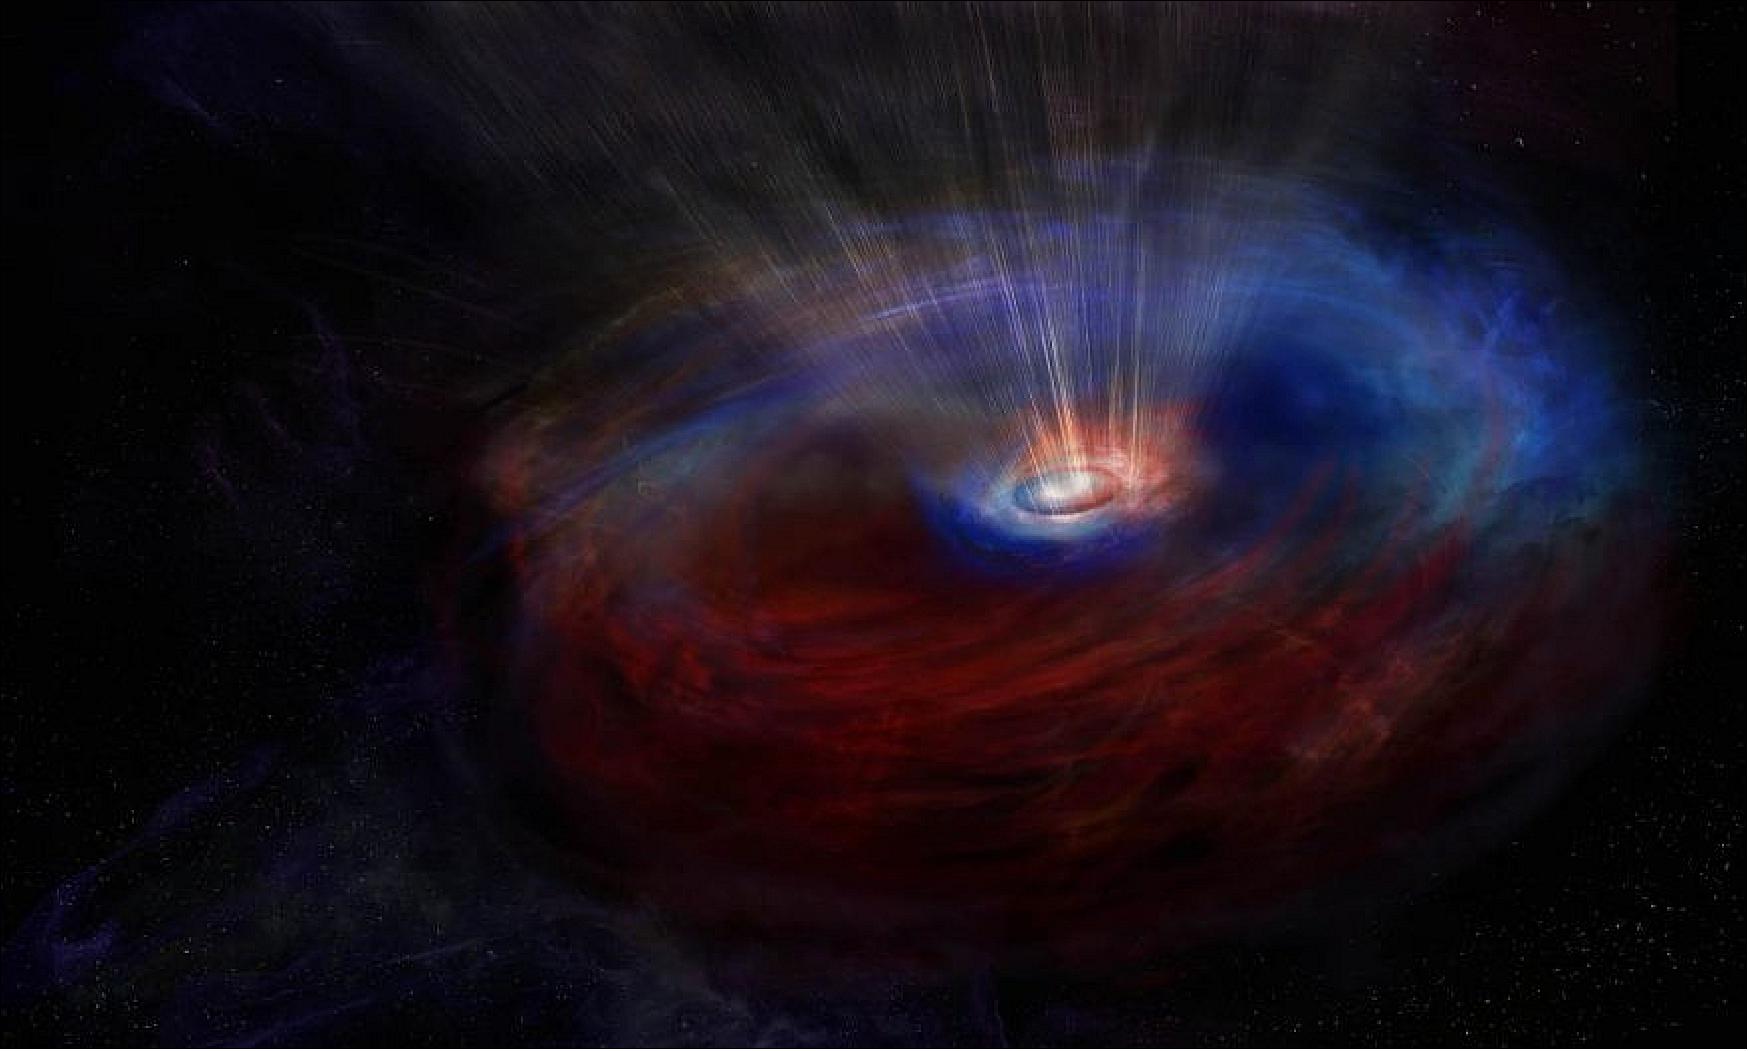 Figure 81: Artist's impression of the heart of galaxy NGC 1068, which harbors an actively feeding supermassive black hole, hidden within a thick doughnut-shaped cloud of dust and gas. ALMA discovered two counter-rotating flows of gas around the black hole. The colors in this image represent the motion of the gas: blue is material moving toward us, red is moving away (image credit: NRAO/AUI/NSF, S. Dagnello)